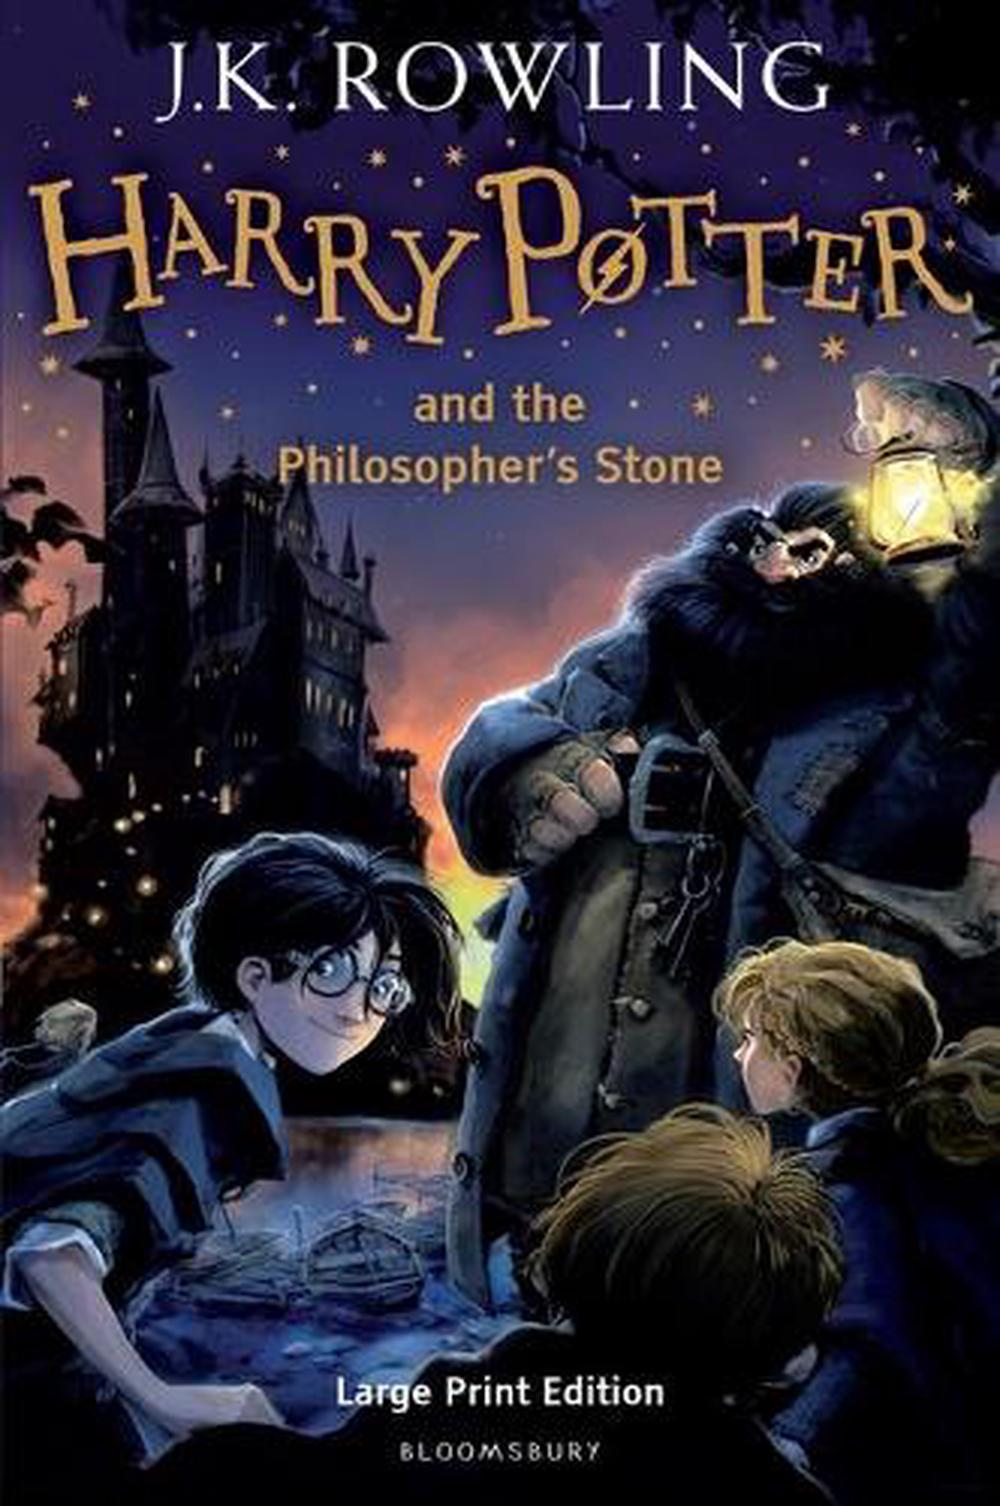 harry potter and the philosopher's stone book review essay